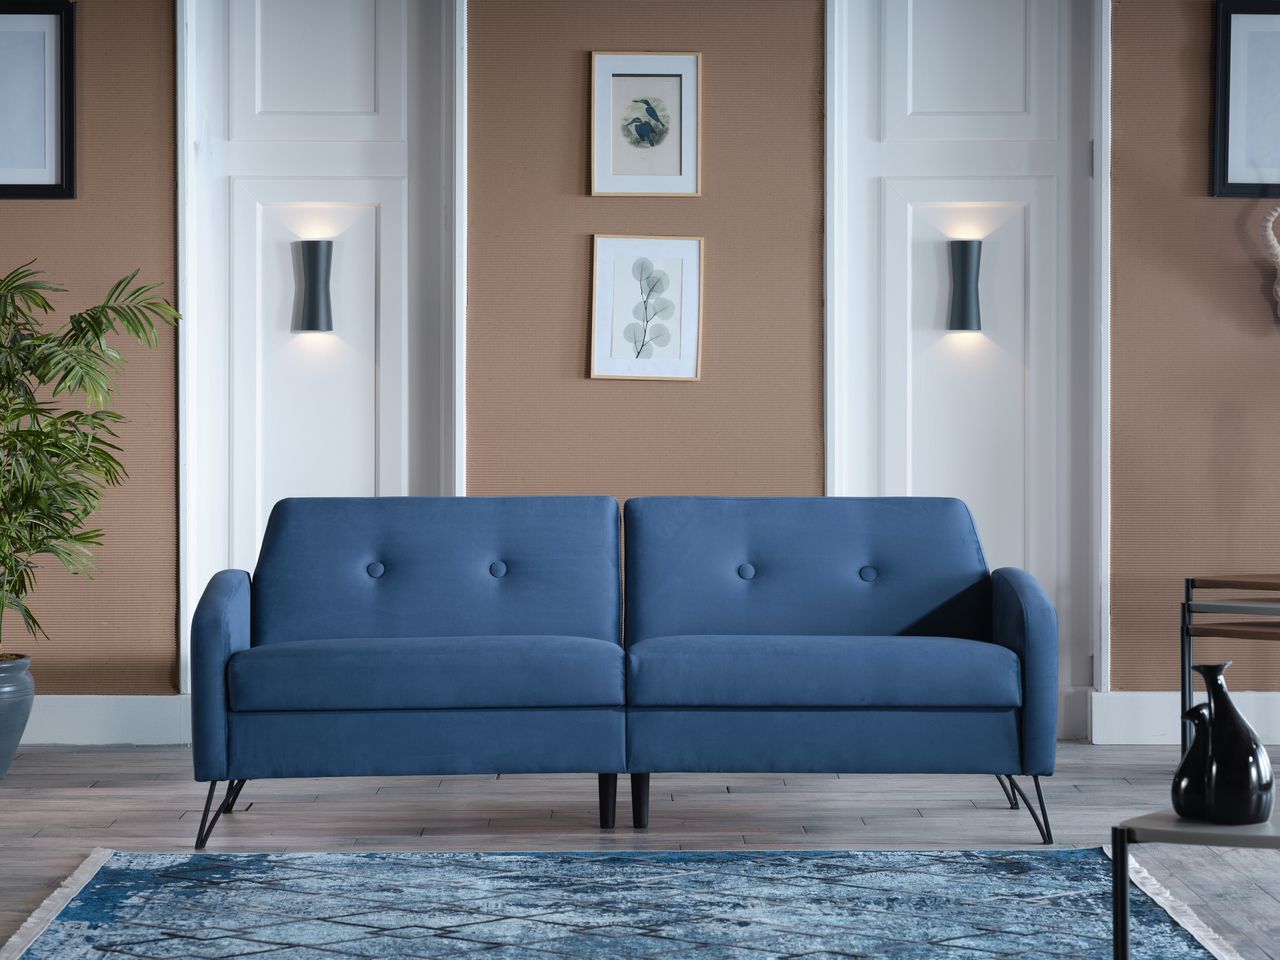 Juniper Vika Navy Blue 3 Seat Sleeper Sofabellona | 1stopbedrooms In Navy Sleeper Sofa Couches (View 9 of 15)